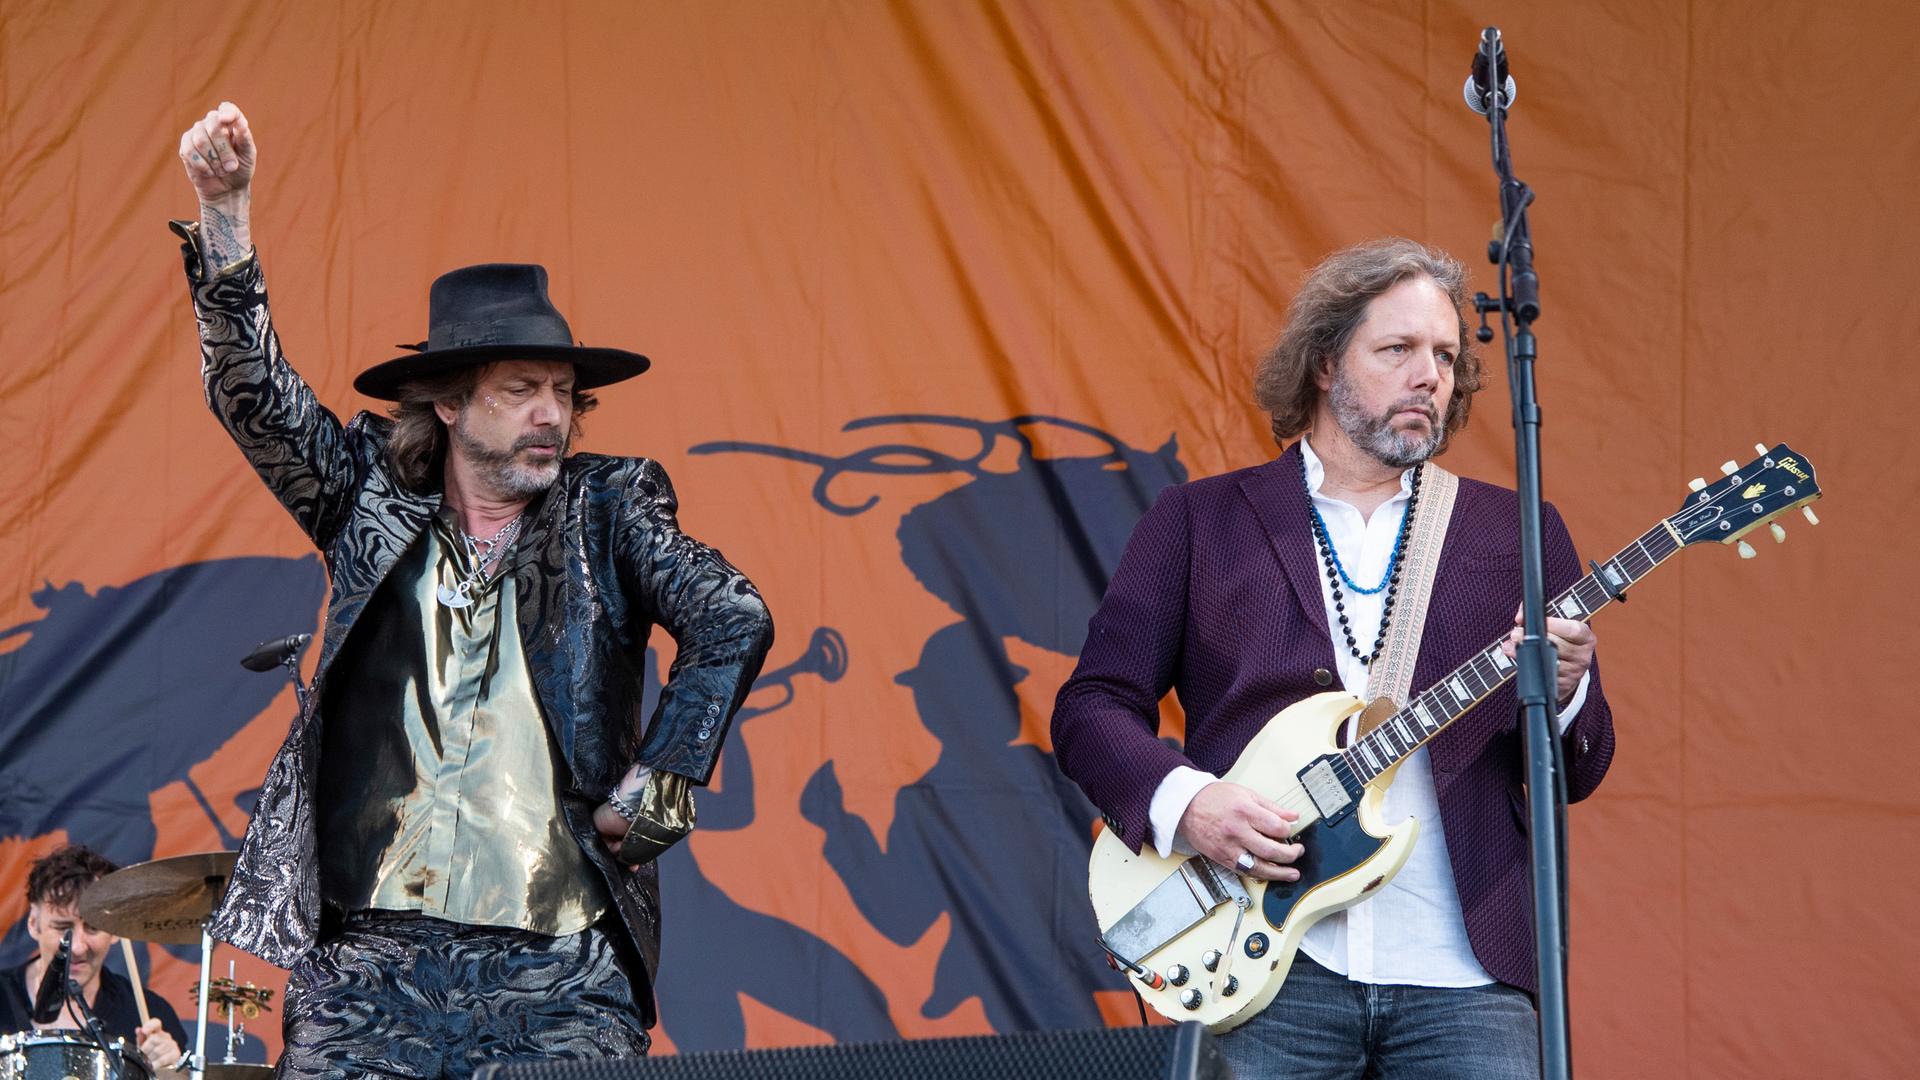 Chris Robinson, left, and Rich Robinson of The Black Crowes perform at the New Orleans Jazz and Heritage Festival, on Friday, May 6, 2022, in New Orleans. (Photo by Amy Harris/Invision/AP)